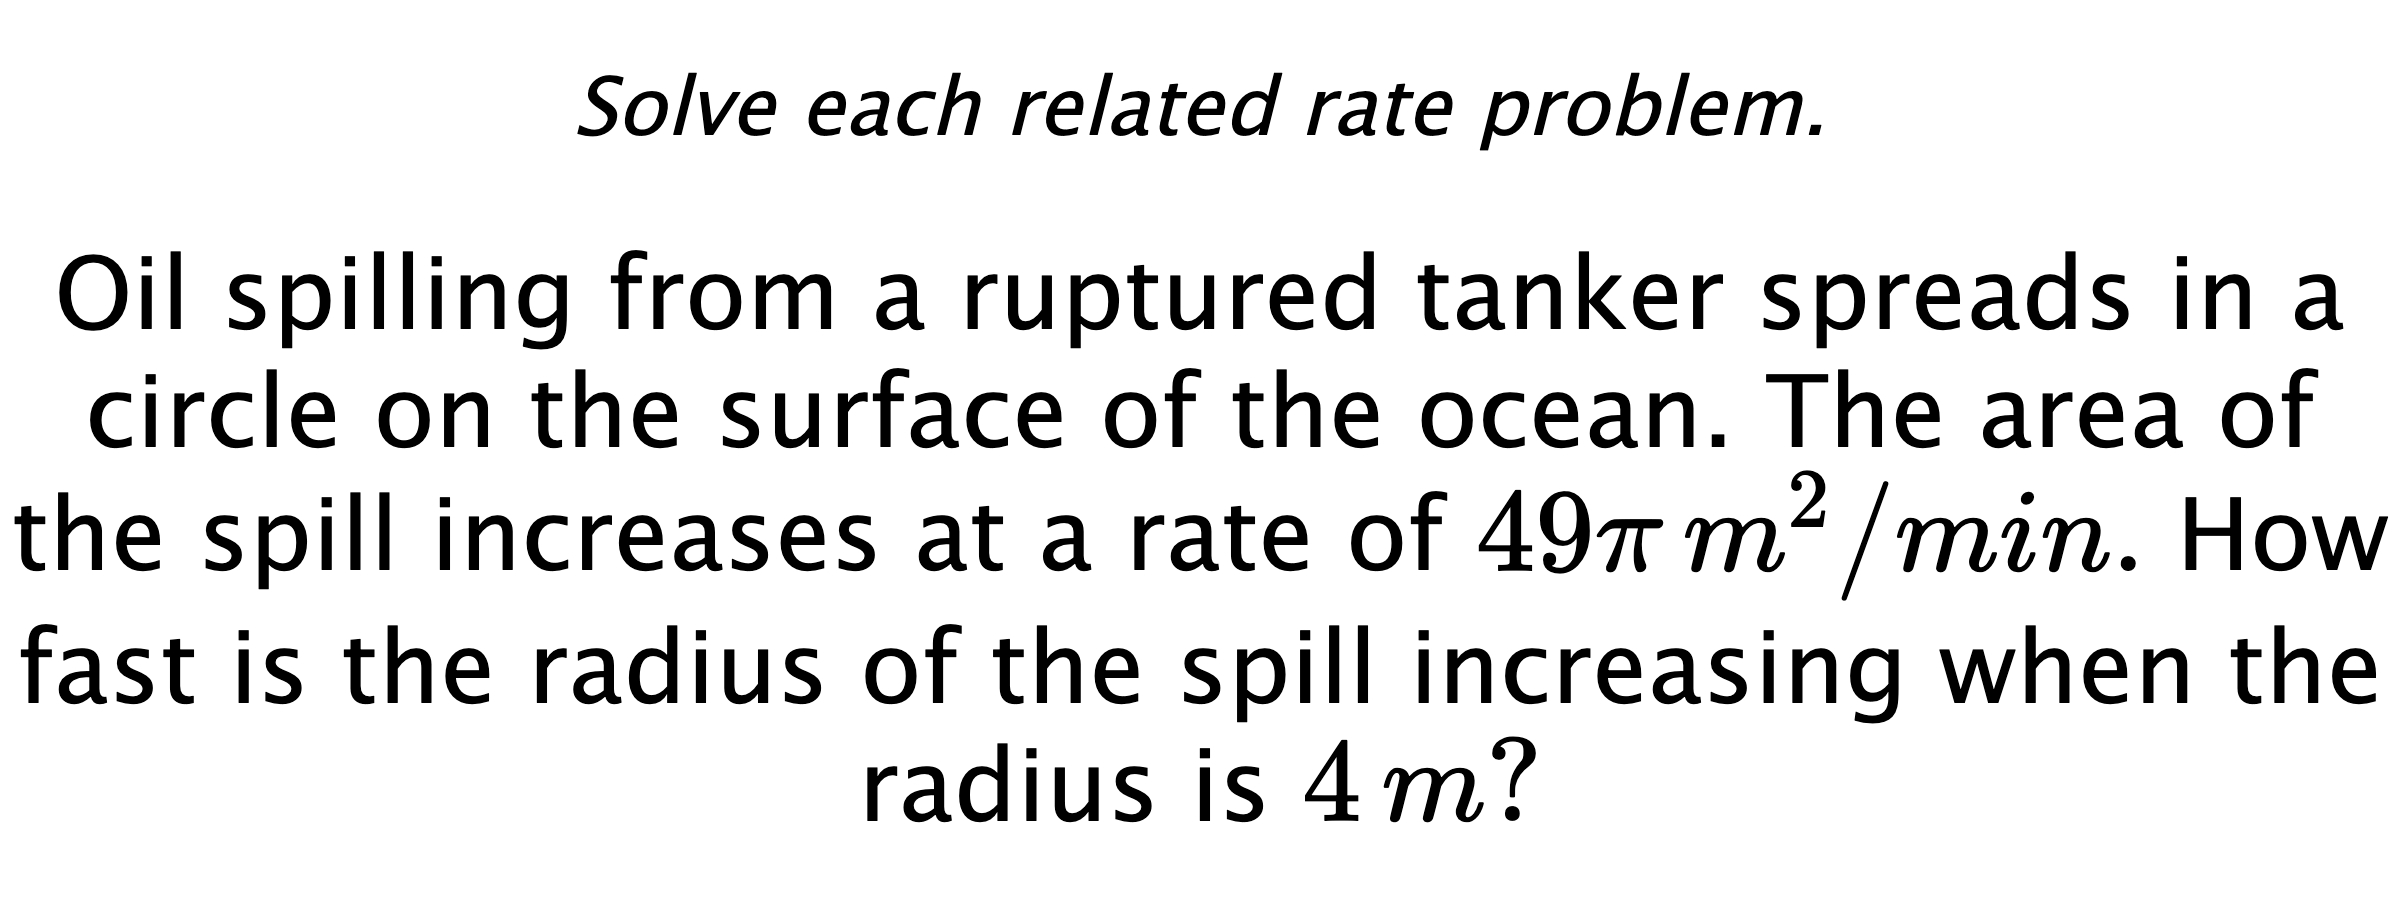 Solve each related rate problem. Oil spilling from a ruptured tanker spreads in a circle on the surface of the ocean. The area of the spill increases at a rate of $49\pi\,m^{2}/min.$ How fast is the radius of the spill increasing when the radius is $4\,m?$